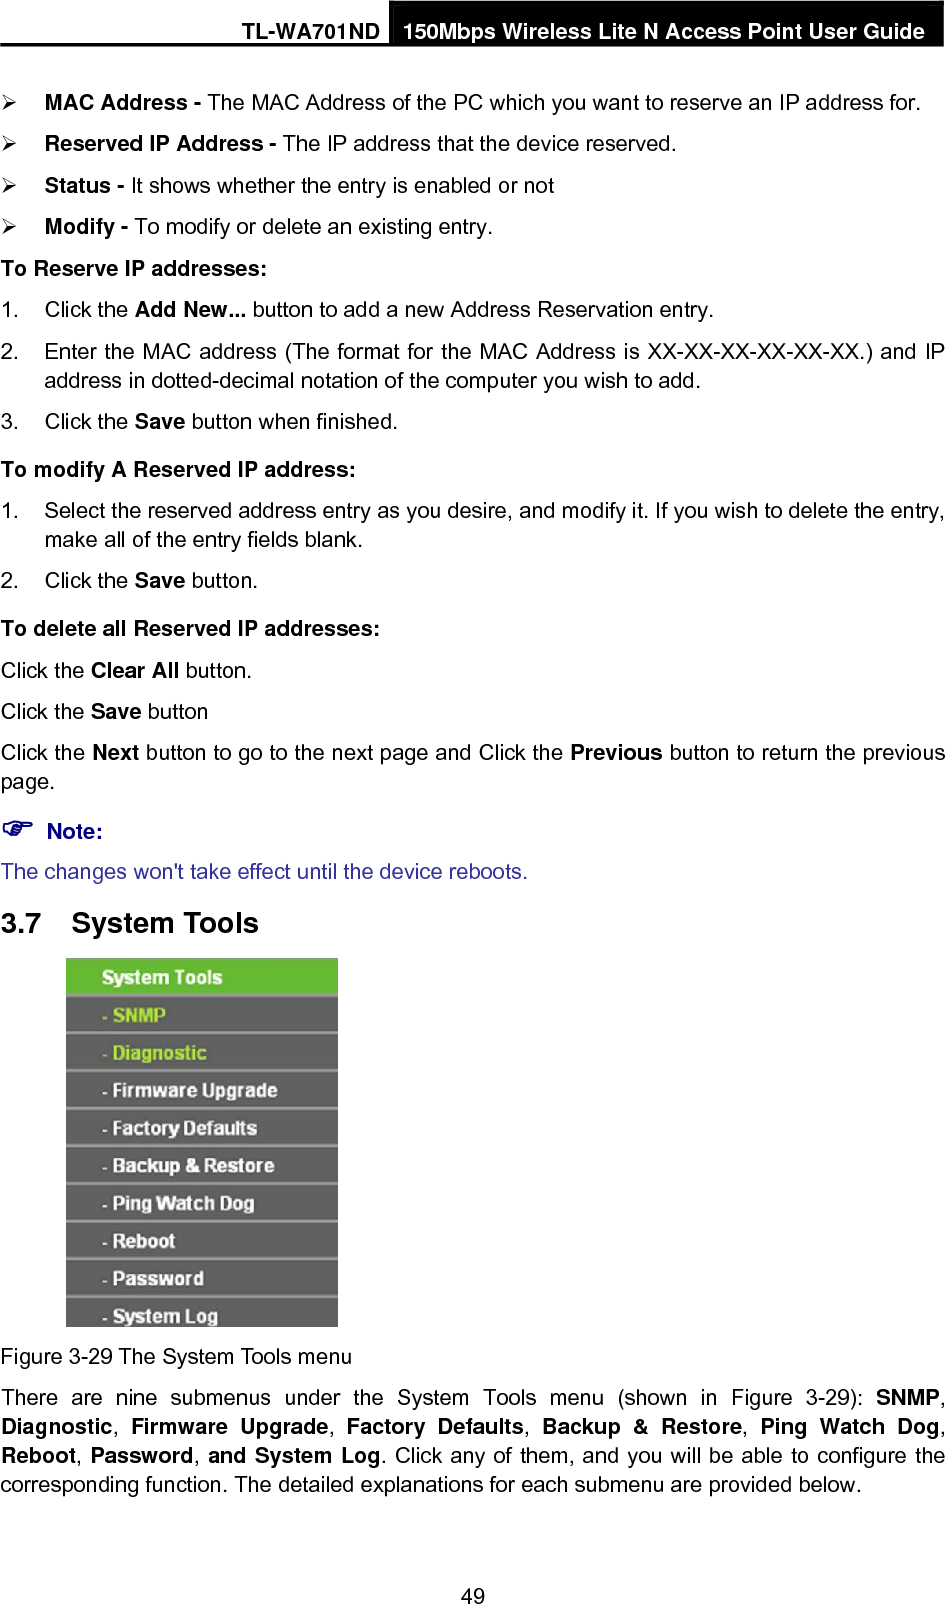 TL-WA701ND 150Mbps Wireless Lite N Access Point User Guide ¾ MAC Address - The MAC Address of the PC which you want to reserve an IP address for. ¾ Reserved IP Address - The IP address that the device reserved.   ¾ Status - It shows whether the entry is enabled or not   ¾ Modify - To modify or delete an existing entry.   To Reserve IP addresses: 1. Click the Add New... button to add a new Address Reservation entry. 2.  Enter the MAC address (The format for the MAC Address is XX-XX-XX-XX-XX-XX.) and IP address in dotted-decimal notation of the computer you wish to add. 3. Click the Save button when finished. To modify A Reserved IP address: 1.  Select the reserved address entry as you desire, and modify it. If you wish to delete the entry, make all of the entry fields blank. 2. Click the Save button. To delete all Reserved IP addresses: Click the Clear All button. Click the Save button Click the Next button to go to the next page and Click the Previous button to return the previous page. ) Note: The changes won&apos;t take effect until the device reboots. 3.7  System Tools  Figure 3-29 The System Tools menu There are nine submenus under the System Tools menu (shown in Figure 3-29):  SNMP, Diagnostic,  Firmware Upgrade,  Factory Defaults, Backup &amp; Restore,  Ping Watch Dog, Reboot, Password, and System Log. Click any of them, and you will be able to configure the corresponding function. The detailed explanations for each submenu are provided below. 49 